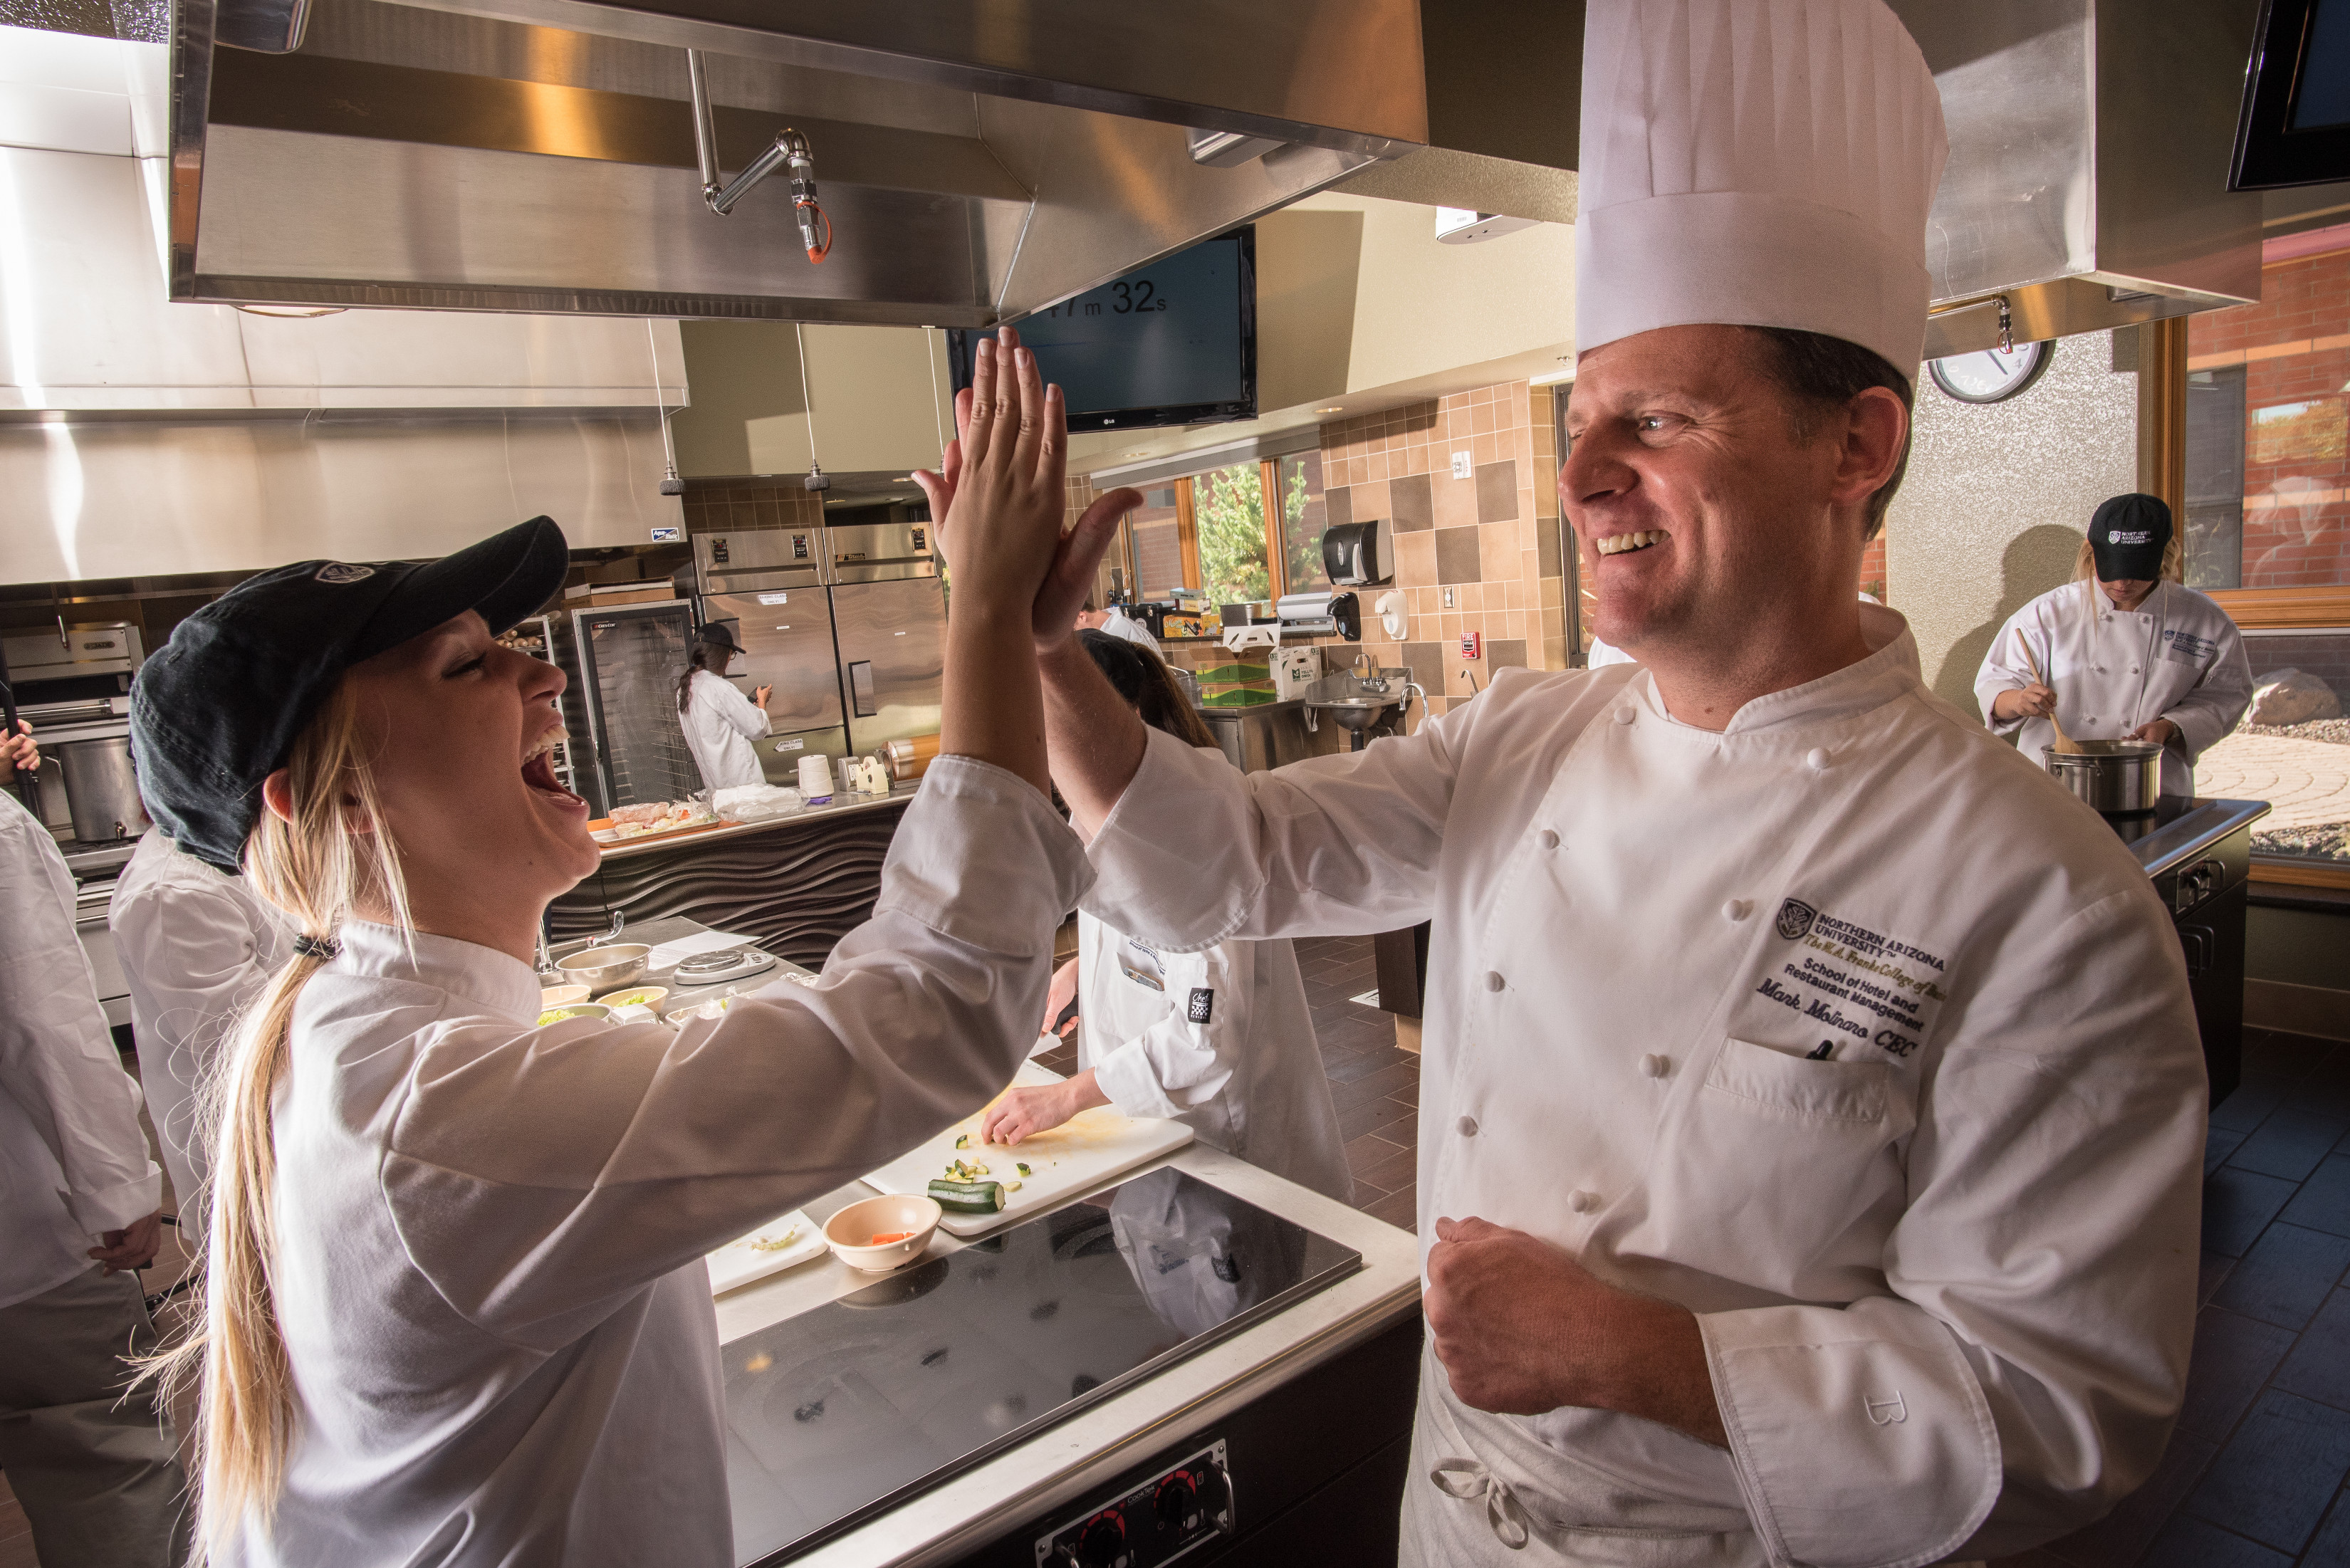 Chef Mark Molinaro and School of Hotel and Restaurant Management student exchanging high-fives while wearing kitchen attire.